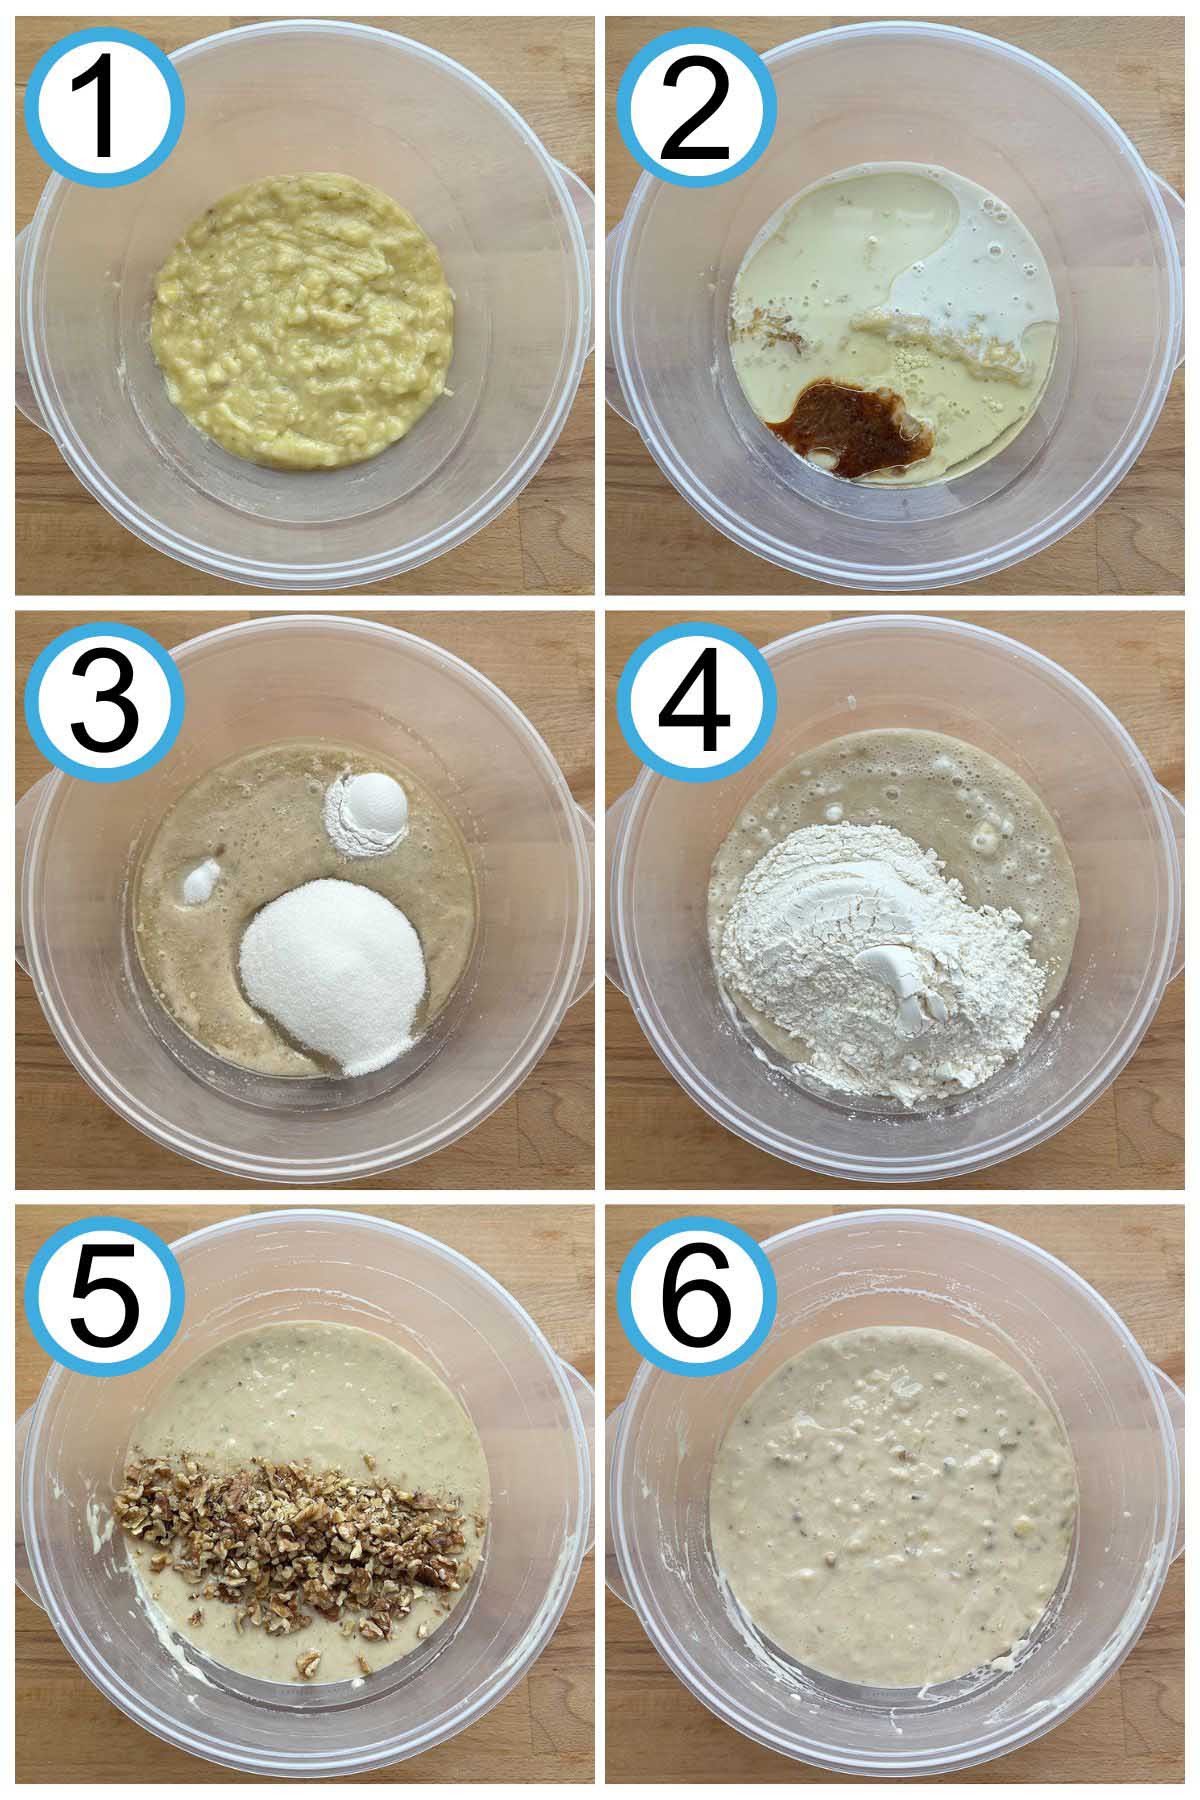 Step by step photograph instructions of making the banana muffin batter. Step 1 shows banana mash. Step 2 shows all wet ingredients. Step 3 shows wet ingredients with sugar, baking powder, and salt. Step 4 shows batter with flour. Step 5 shows batter with walnuts. Step 6 is the completed batter.